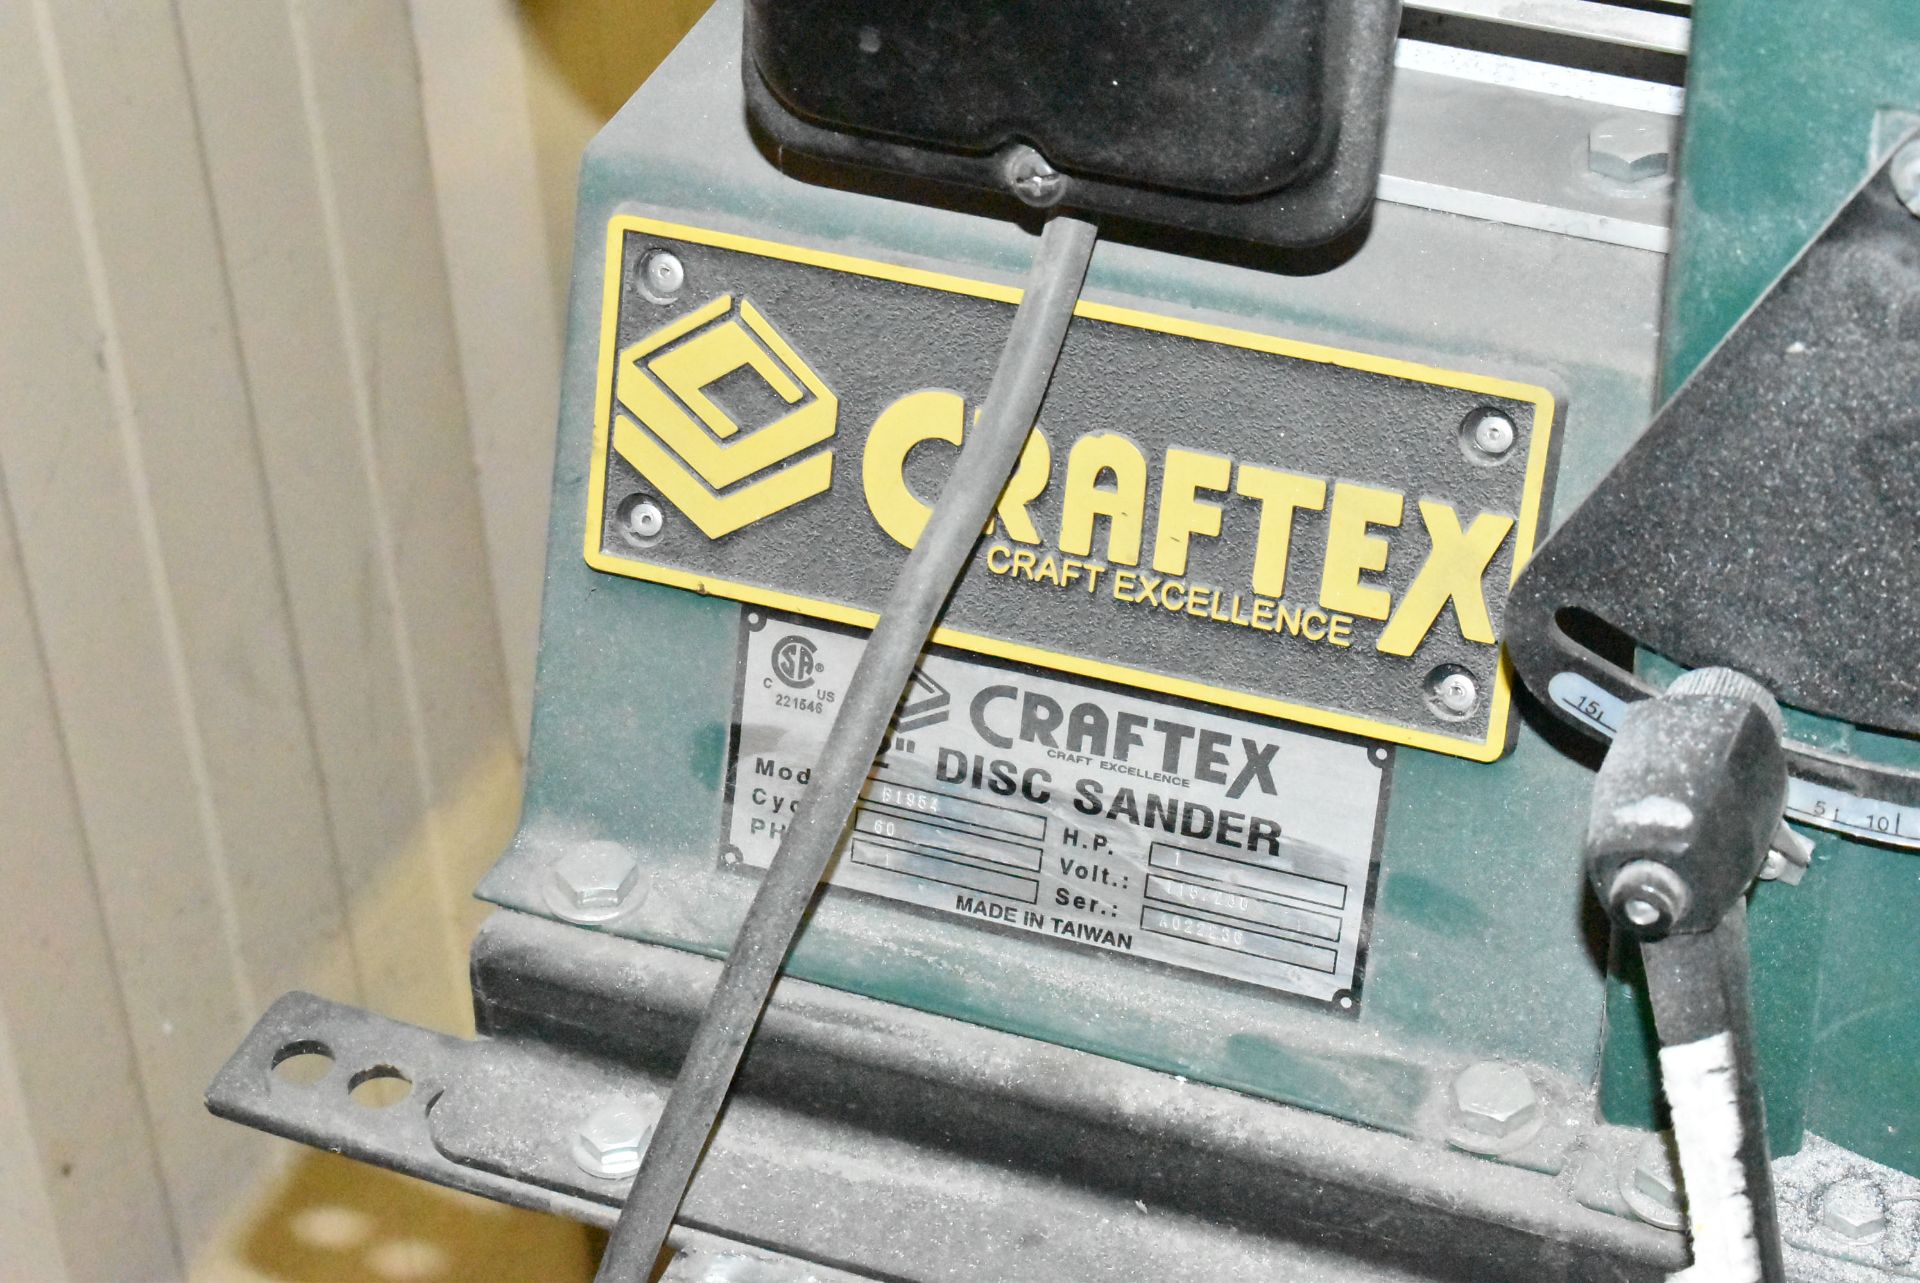 CRAFTEX 12" DISC SANDER, S/N A022236 [RIGGING FOR FOR LOT #29 - $25 CAD PLUS APPLICABLE TAXES] - Image 2 of 5